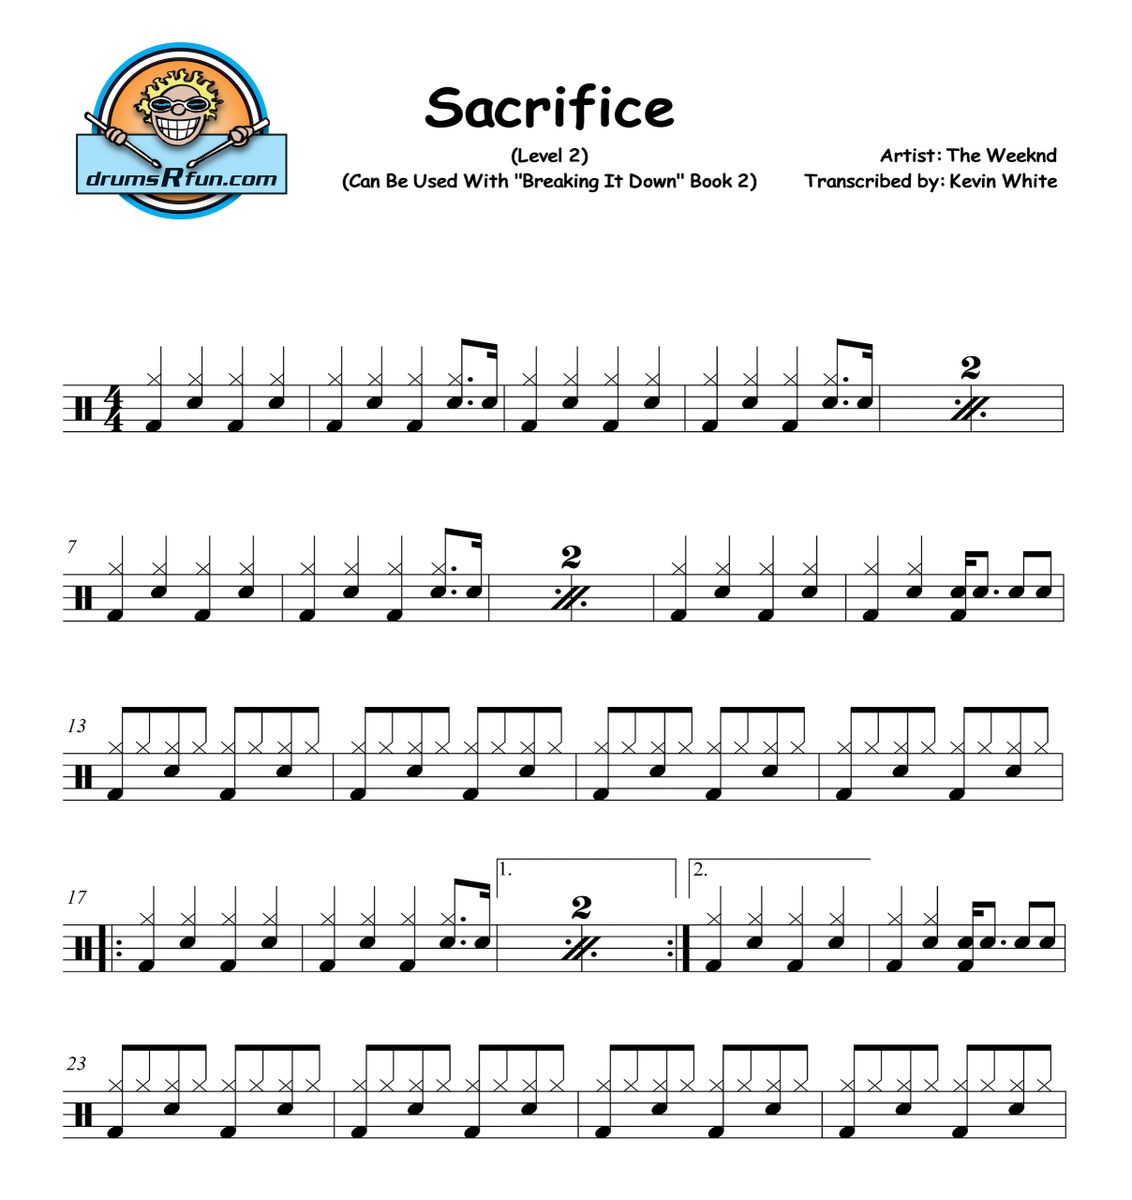 Sacrifice – The Weeknd Sheet music for Drum group (Solo)